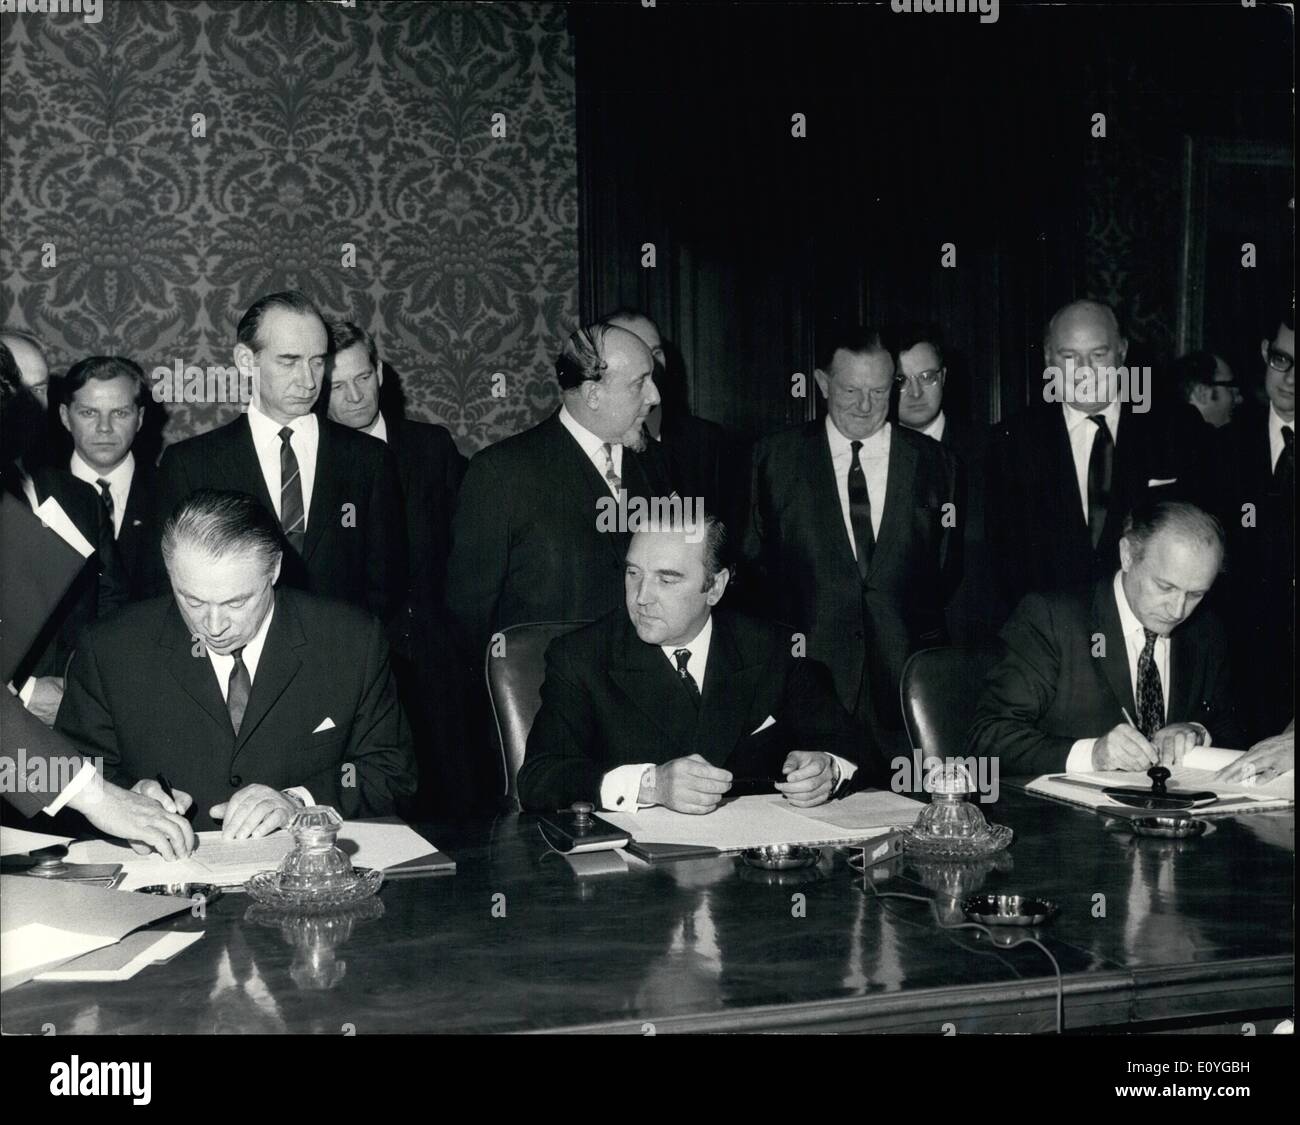 Apr. 04, 1970 - U.K/U.S.S.R Air Services Agreement Supplementary Protocol: A Supplementary Protocol to the U.K/U.S.S.R Air Services Agreement of 1957 was signed at the Foreign Office this afternoon by the Soviet Minister of Civil Aviation M. Evgeny Fedorovich Loginov on behalf of the Board of Trade and Mord Chalfont Minister of State for Foreign and Commonwealth Affairs. The Protocol will give B.O.A.C rights in the route London Moscow Tokyo flying over Siberia for the U.S.S.R the main rights to be given by the United Kingdom will be the right for Aeroflot to fly across the Atlantic via Stock Photo